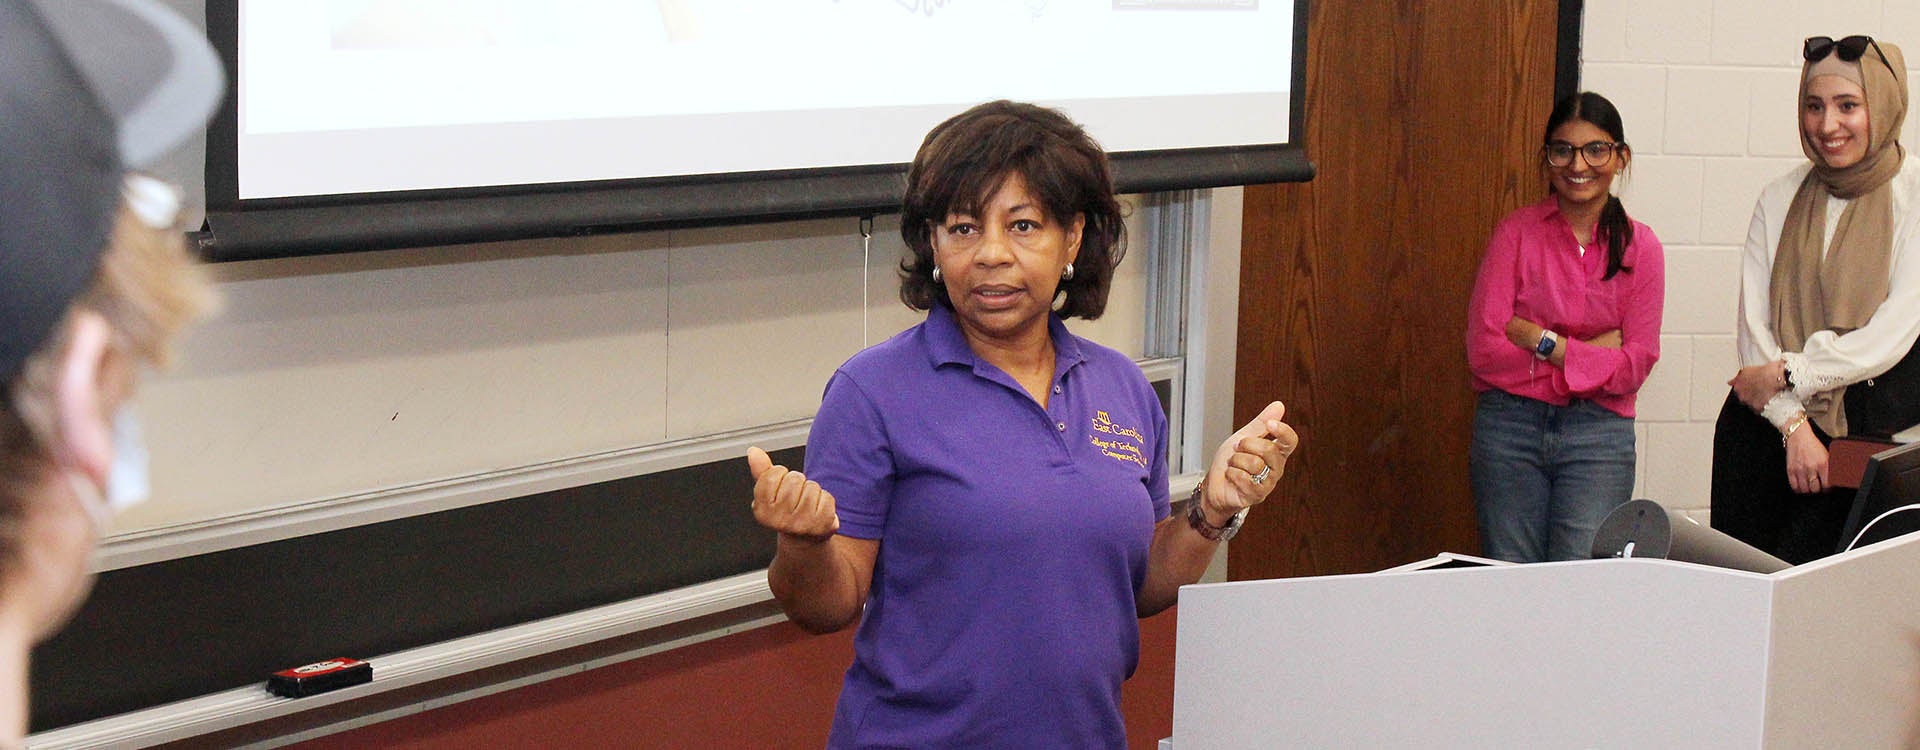 East Carolina University computer science graduate and retired IBM executive Angela Allen speaks to students during the Association of Computing Machinery meeting at the Bate Building. (Photos by Ken Buday)